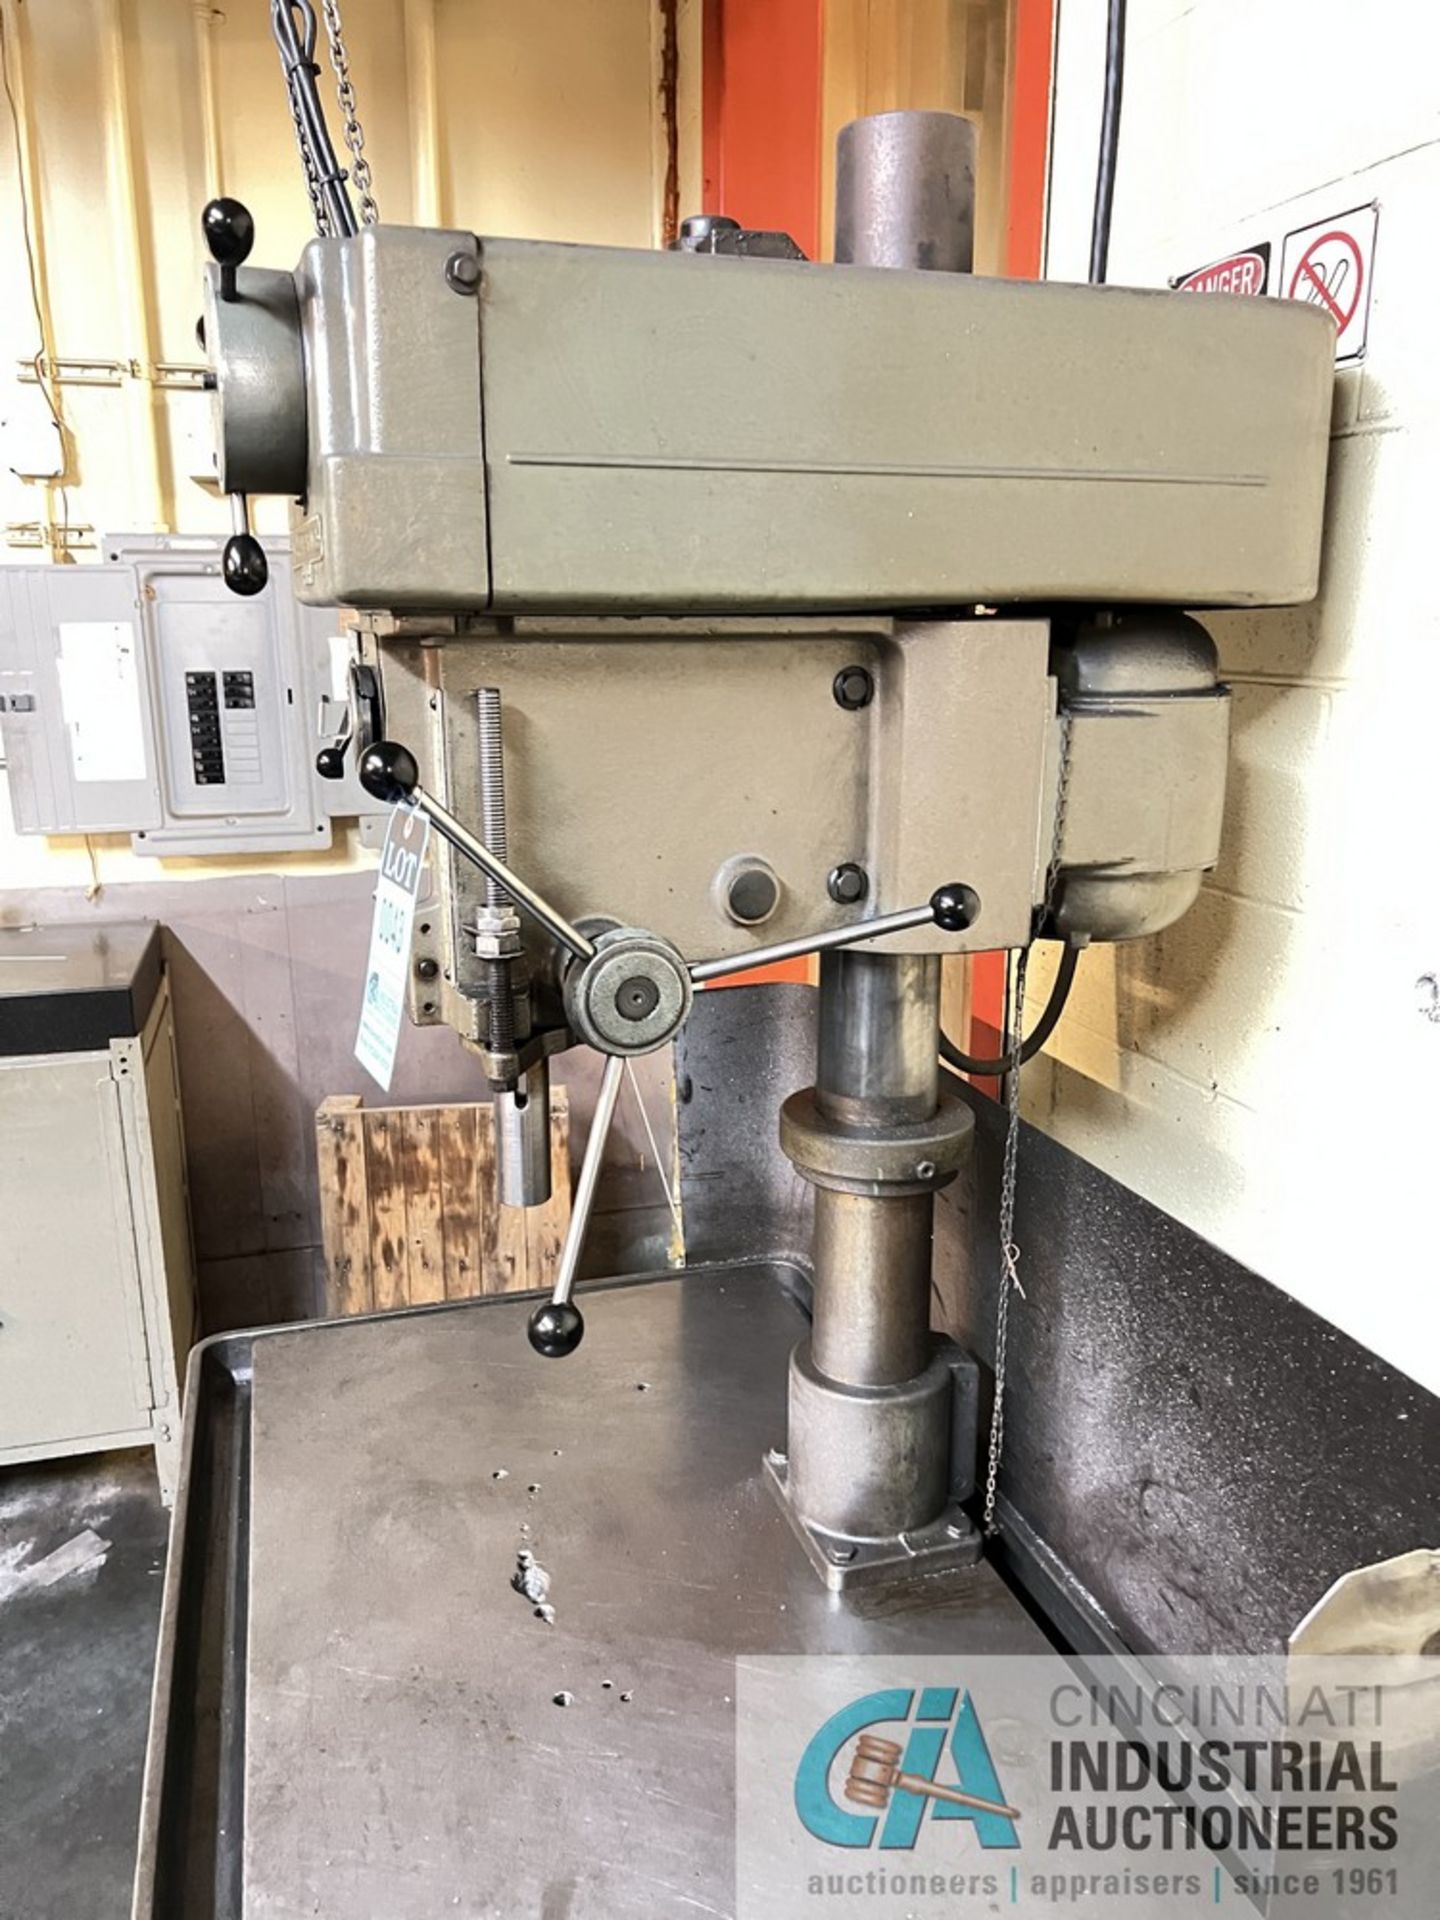 20" CLAUSING MODEL 2285 DRILL PRESS; S/N 514391, 40" X 22" TABLE, SPINDLE SPEEDS: 150-2,000 RPM ** - Image 6 of 6